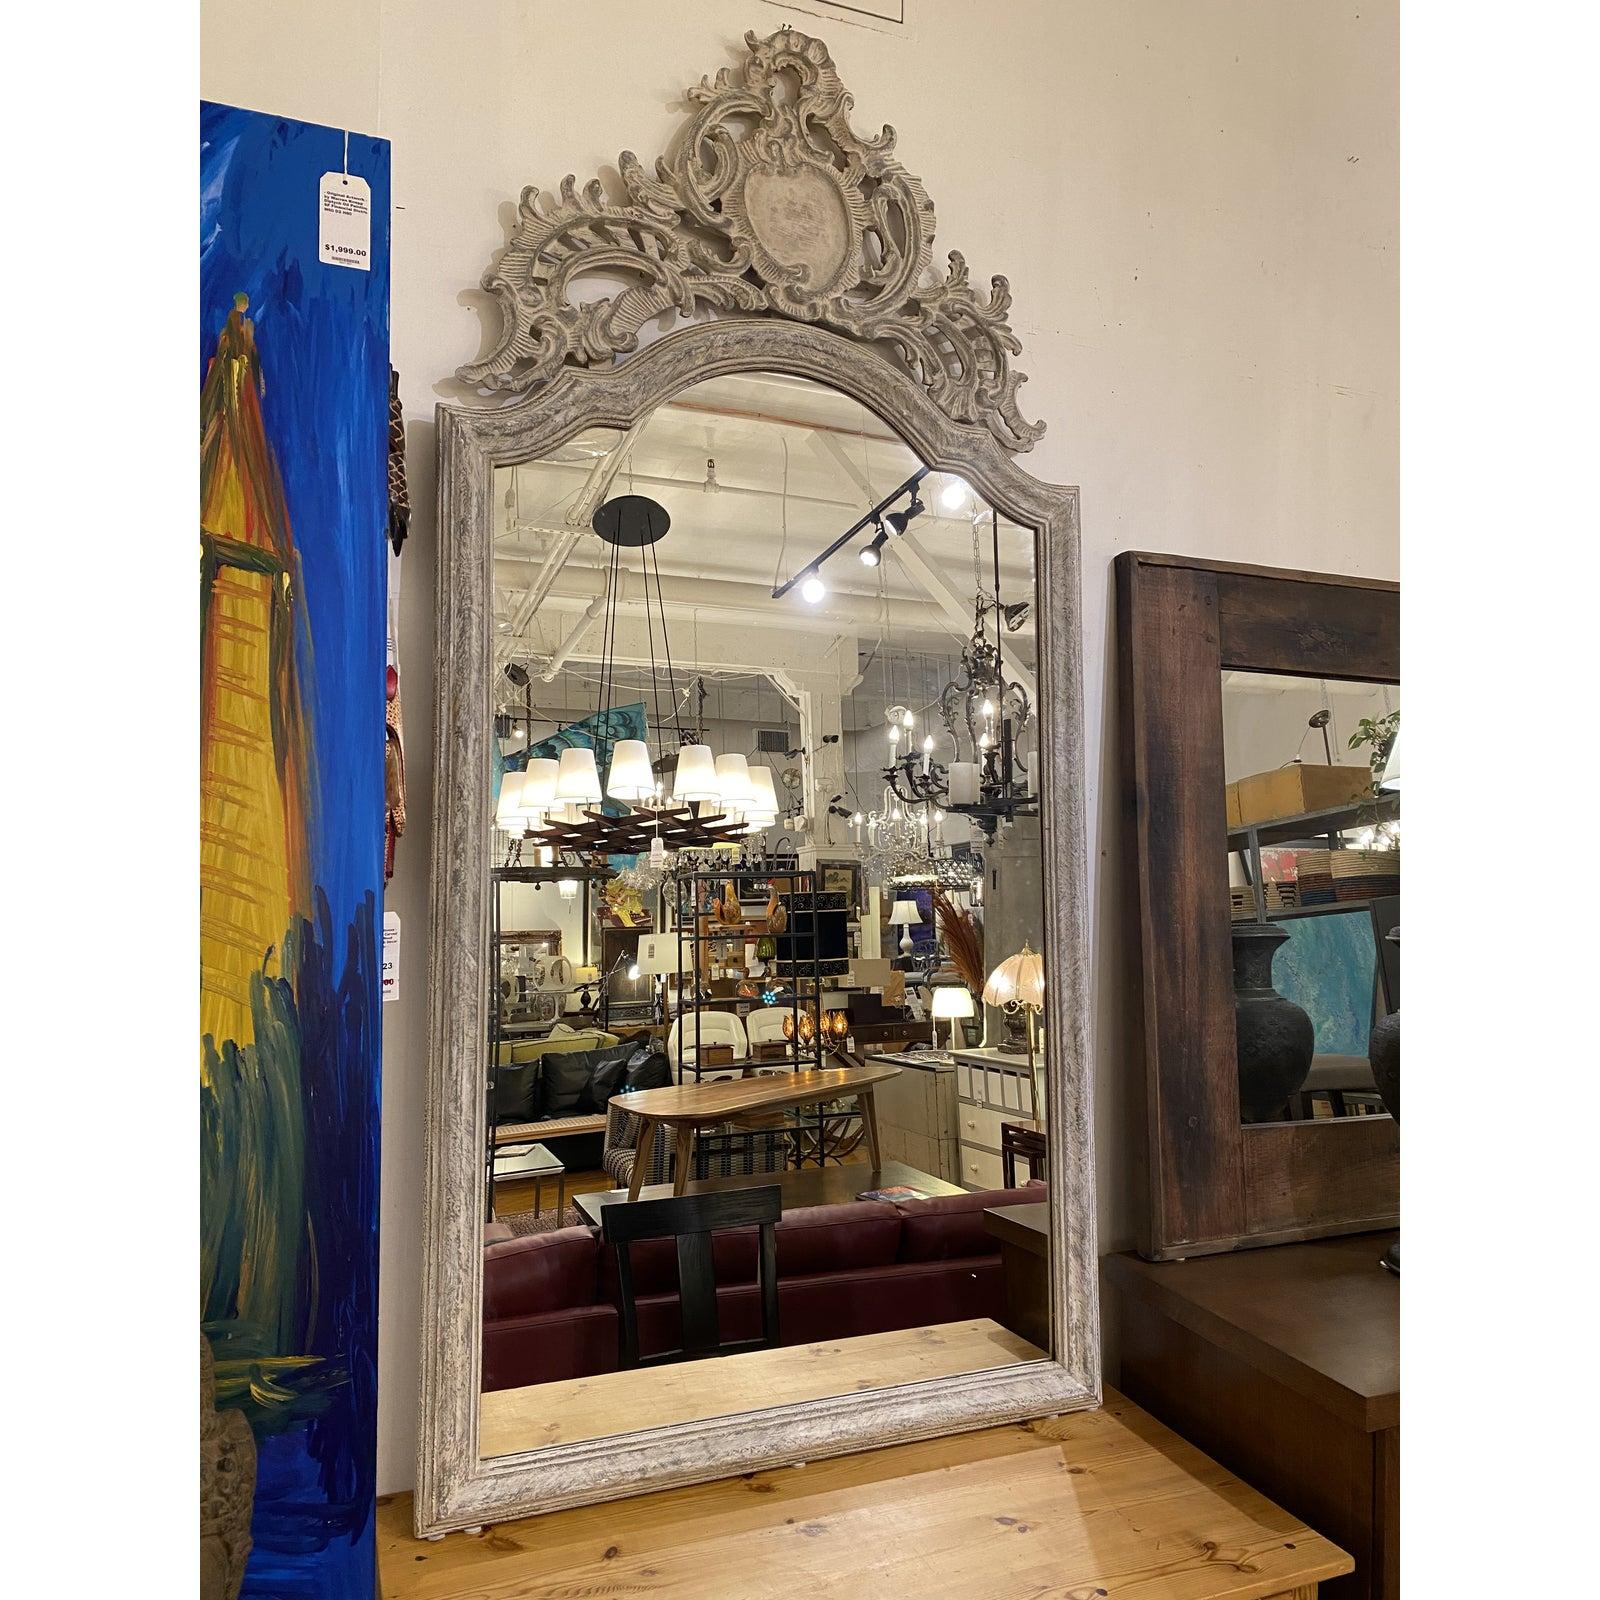 A Maison Grande Louis XIV floor mirror. Designed by Tara Shaw for Restoration Hardware. The crown can be removed. A solid wood frame in a distressed taupe finish.

Original price: $4,720

About Tara Shaw
